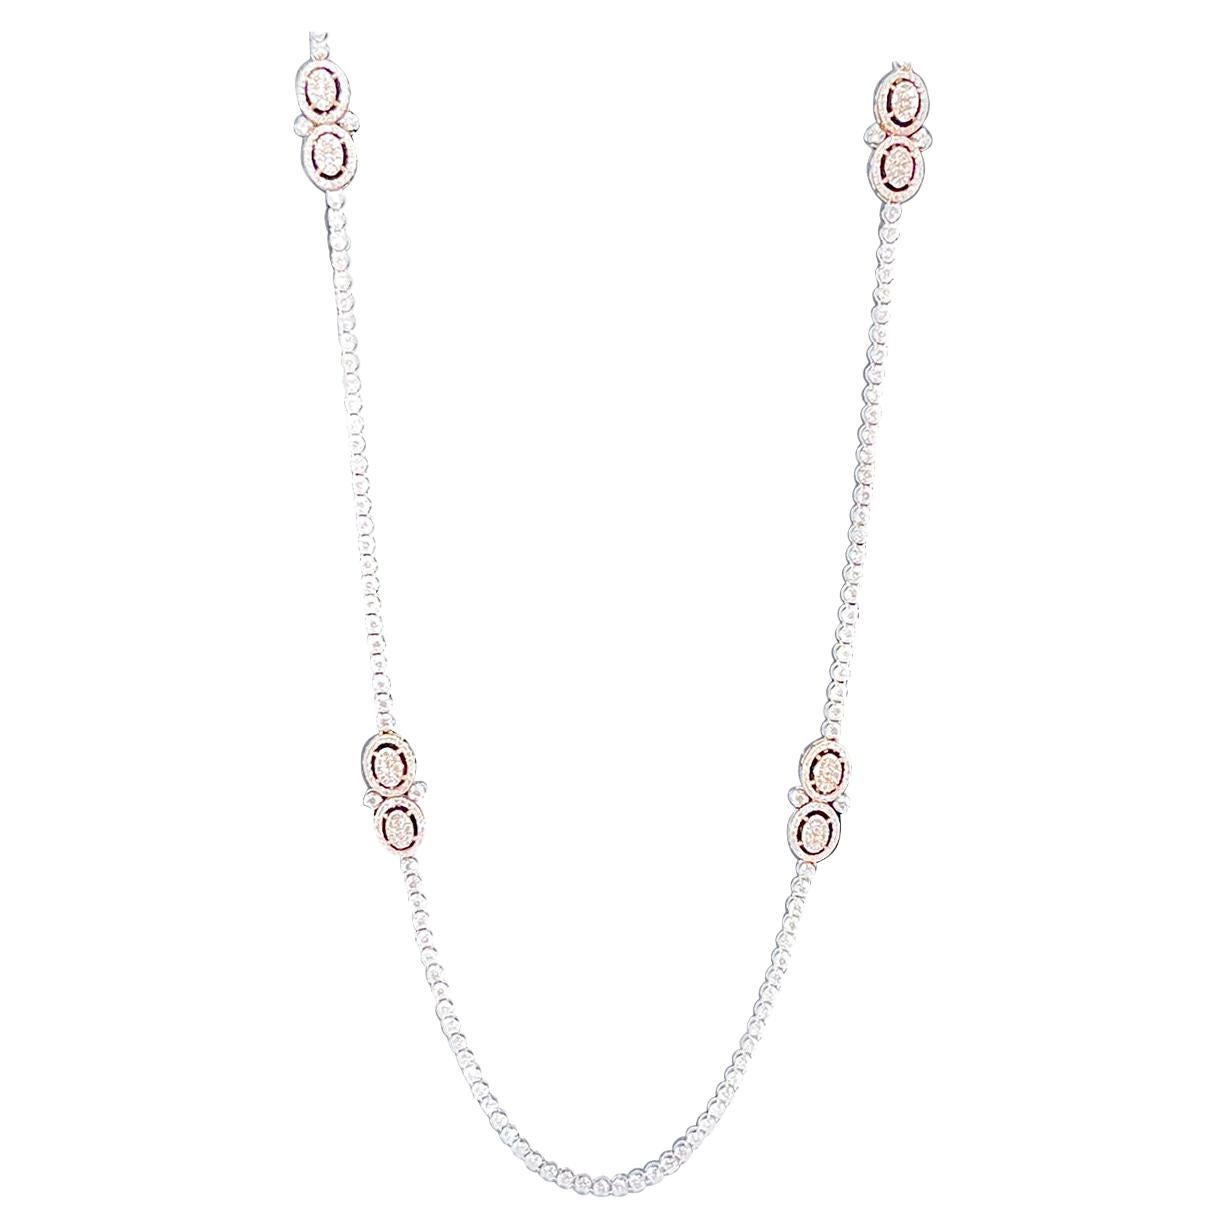 Very Fashionable and in right now is the long opera length necklaces .
This is a 28 inch long necklace with 8 ct of brilliant round cut diamonds.
There are 4 stations of rose gold design with diamonds. 
Please look at all the pictures
14 K gold 27